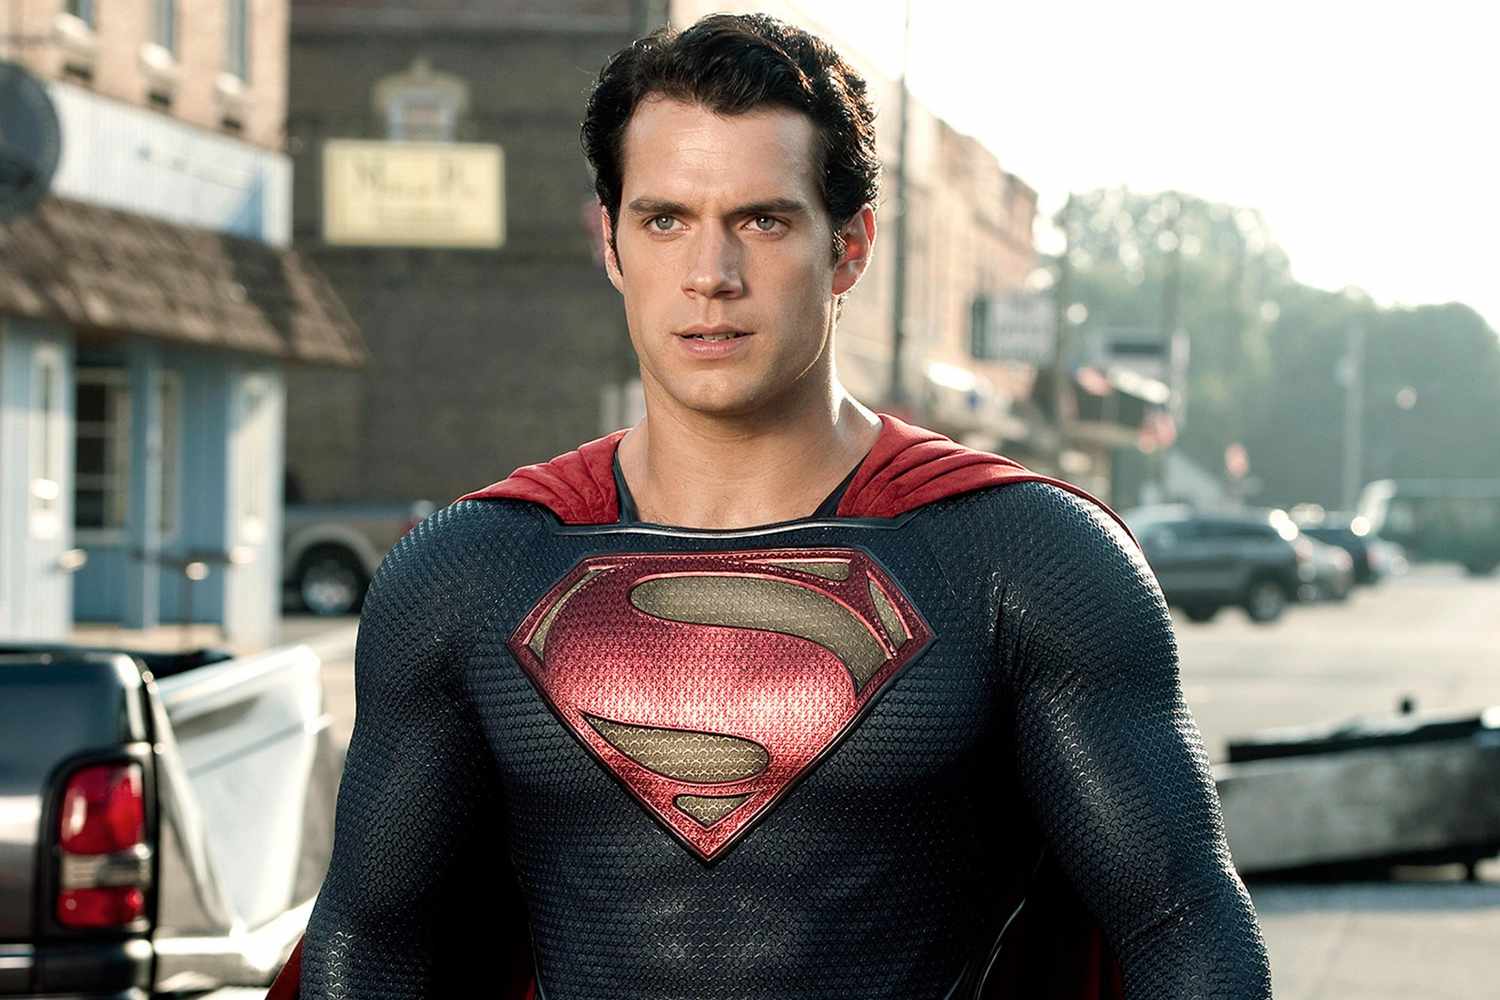 New Superman David Corenswet's Comments About Henry Cavill Would Upset Many  DCU Fans - FandomWire